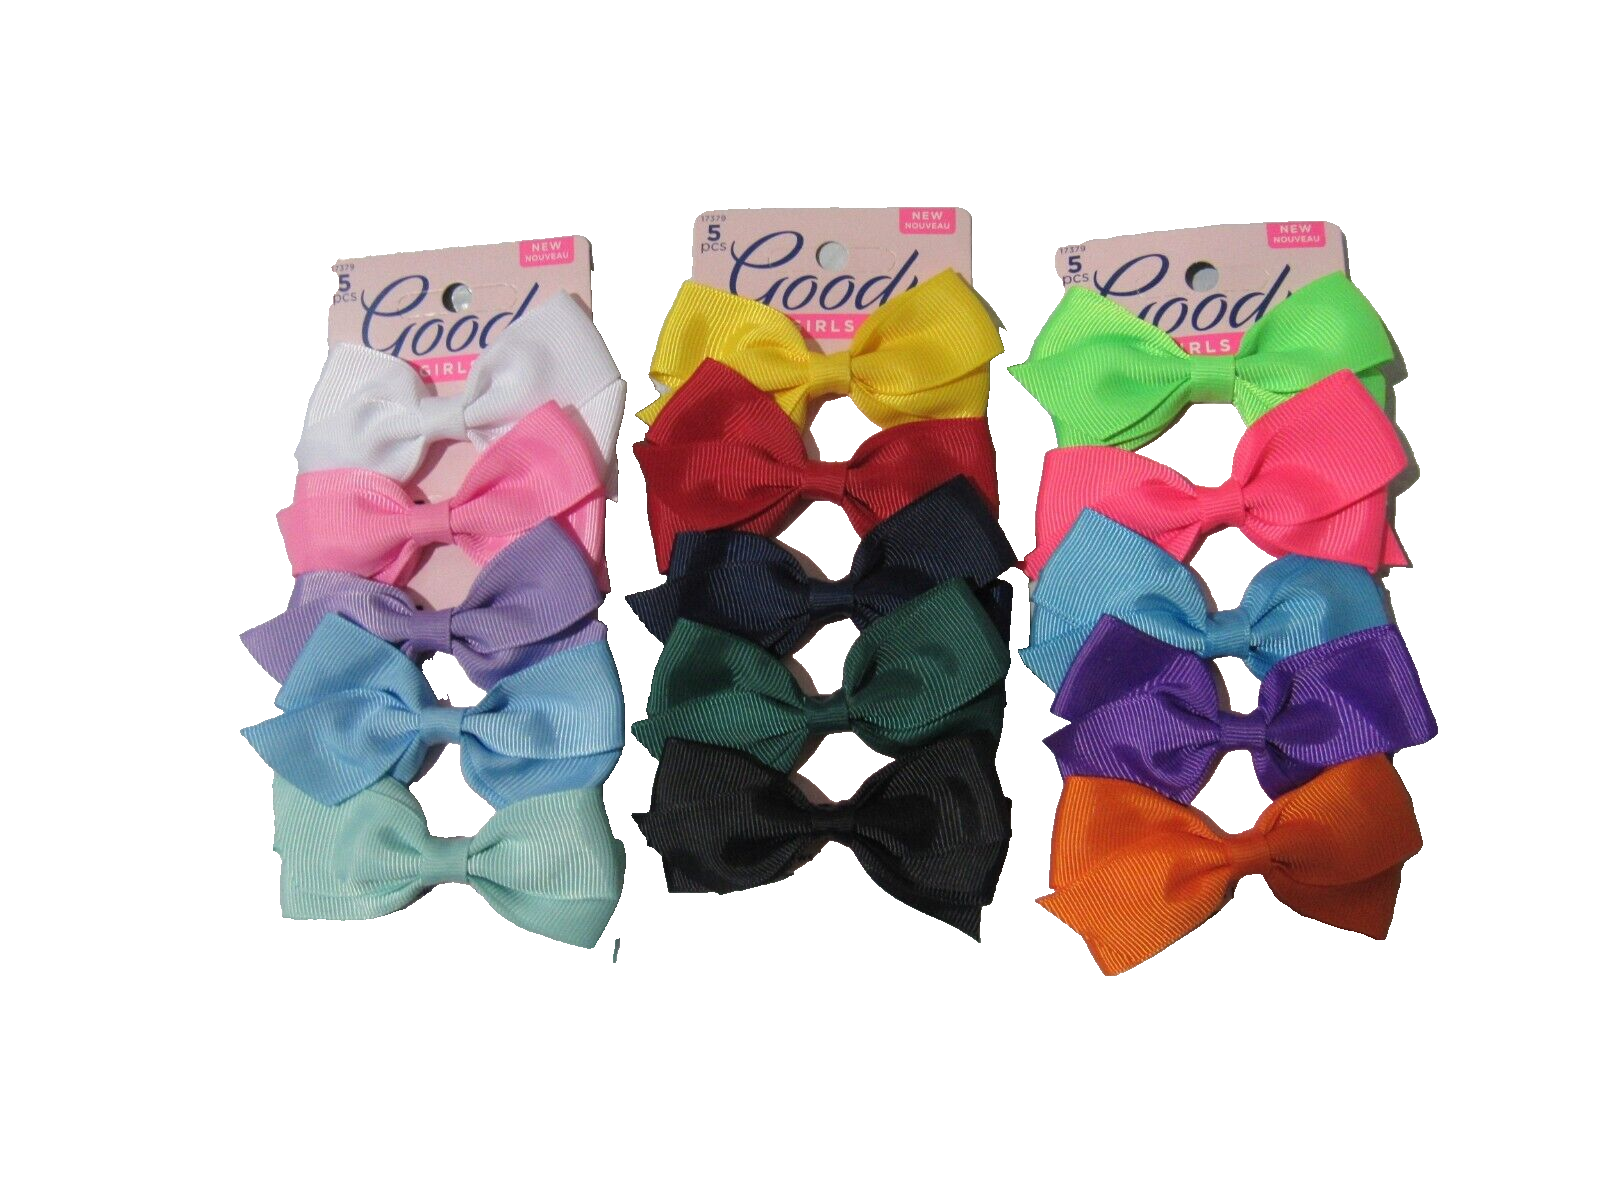 Goody all Different Colors Girls Bow Barrettes 3" total of 15 Piece - $15.99